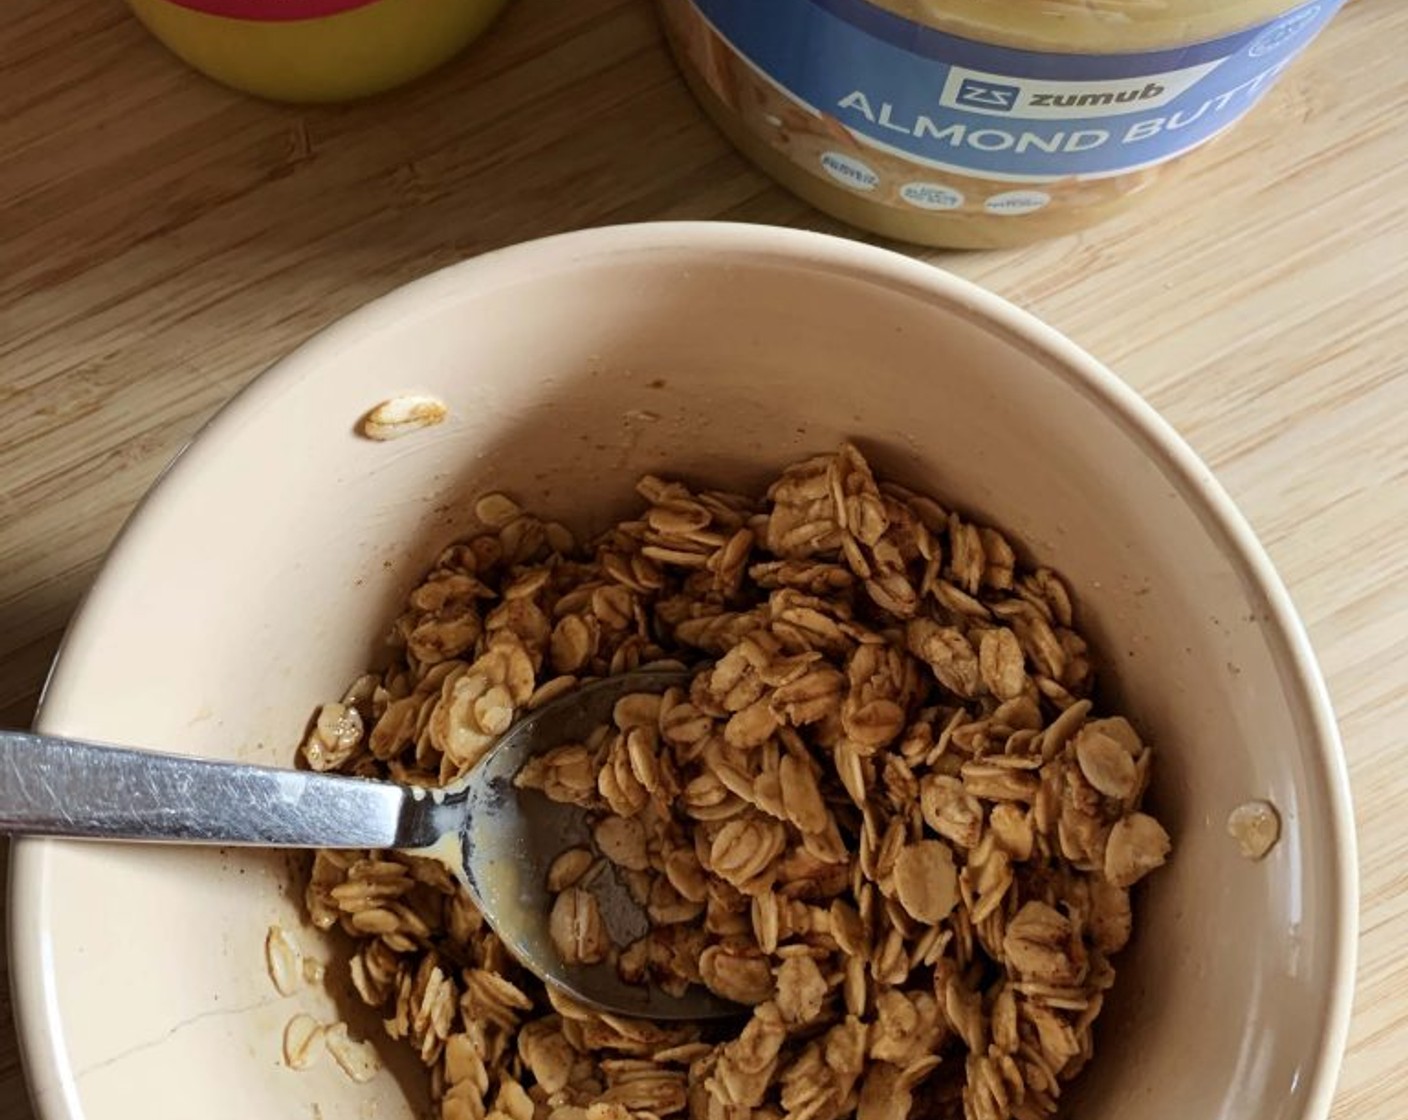 step 7 While the custards are chilling, prepare the granola. This recipe is super simple and hassle-free. In a bowl just stir together Oats (1/2 cup), Almond Butter (1 1/2 Tbsp), Ground Cinnamon (1 dash), and Coconut Ghee (1 Tbsp).